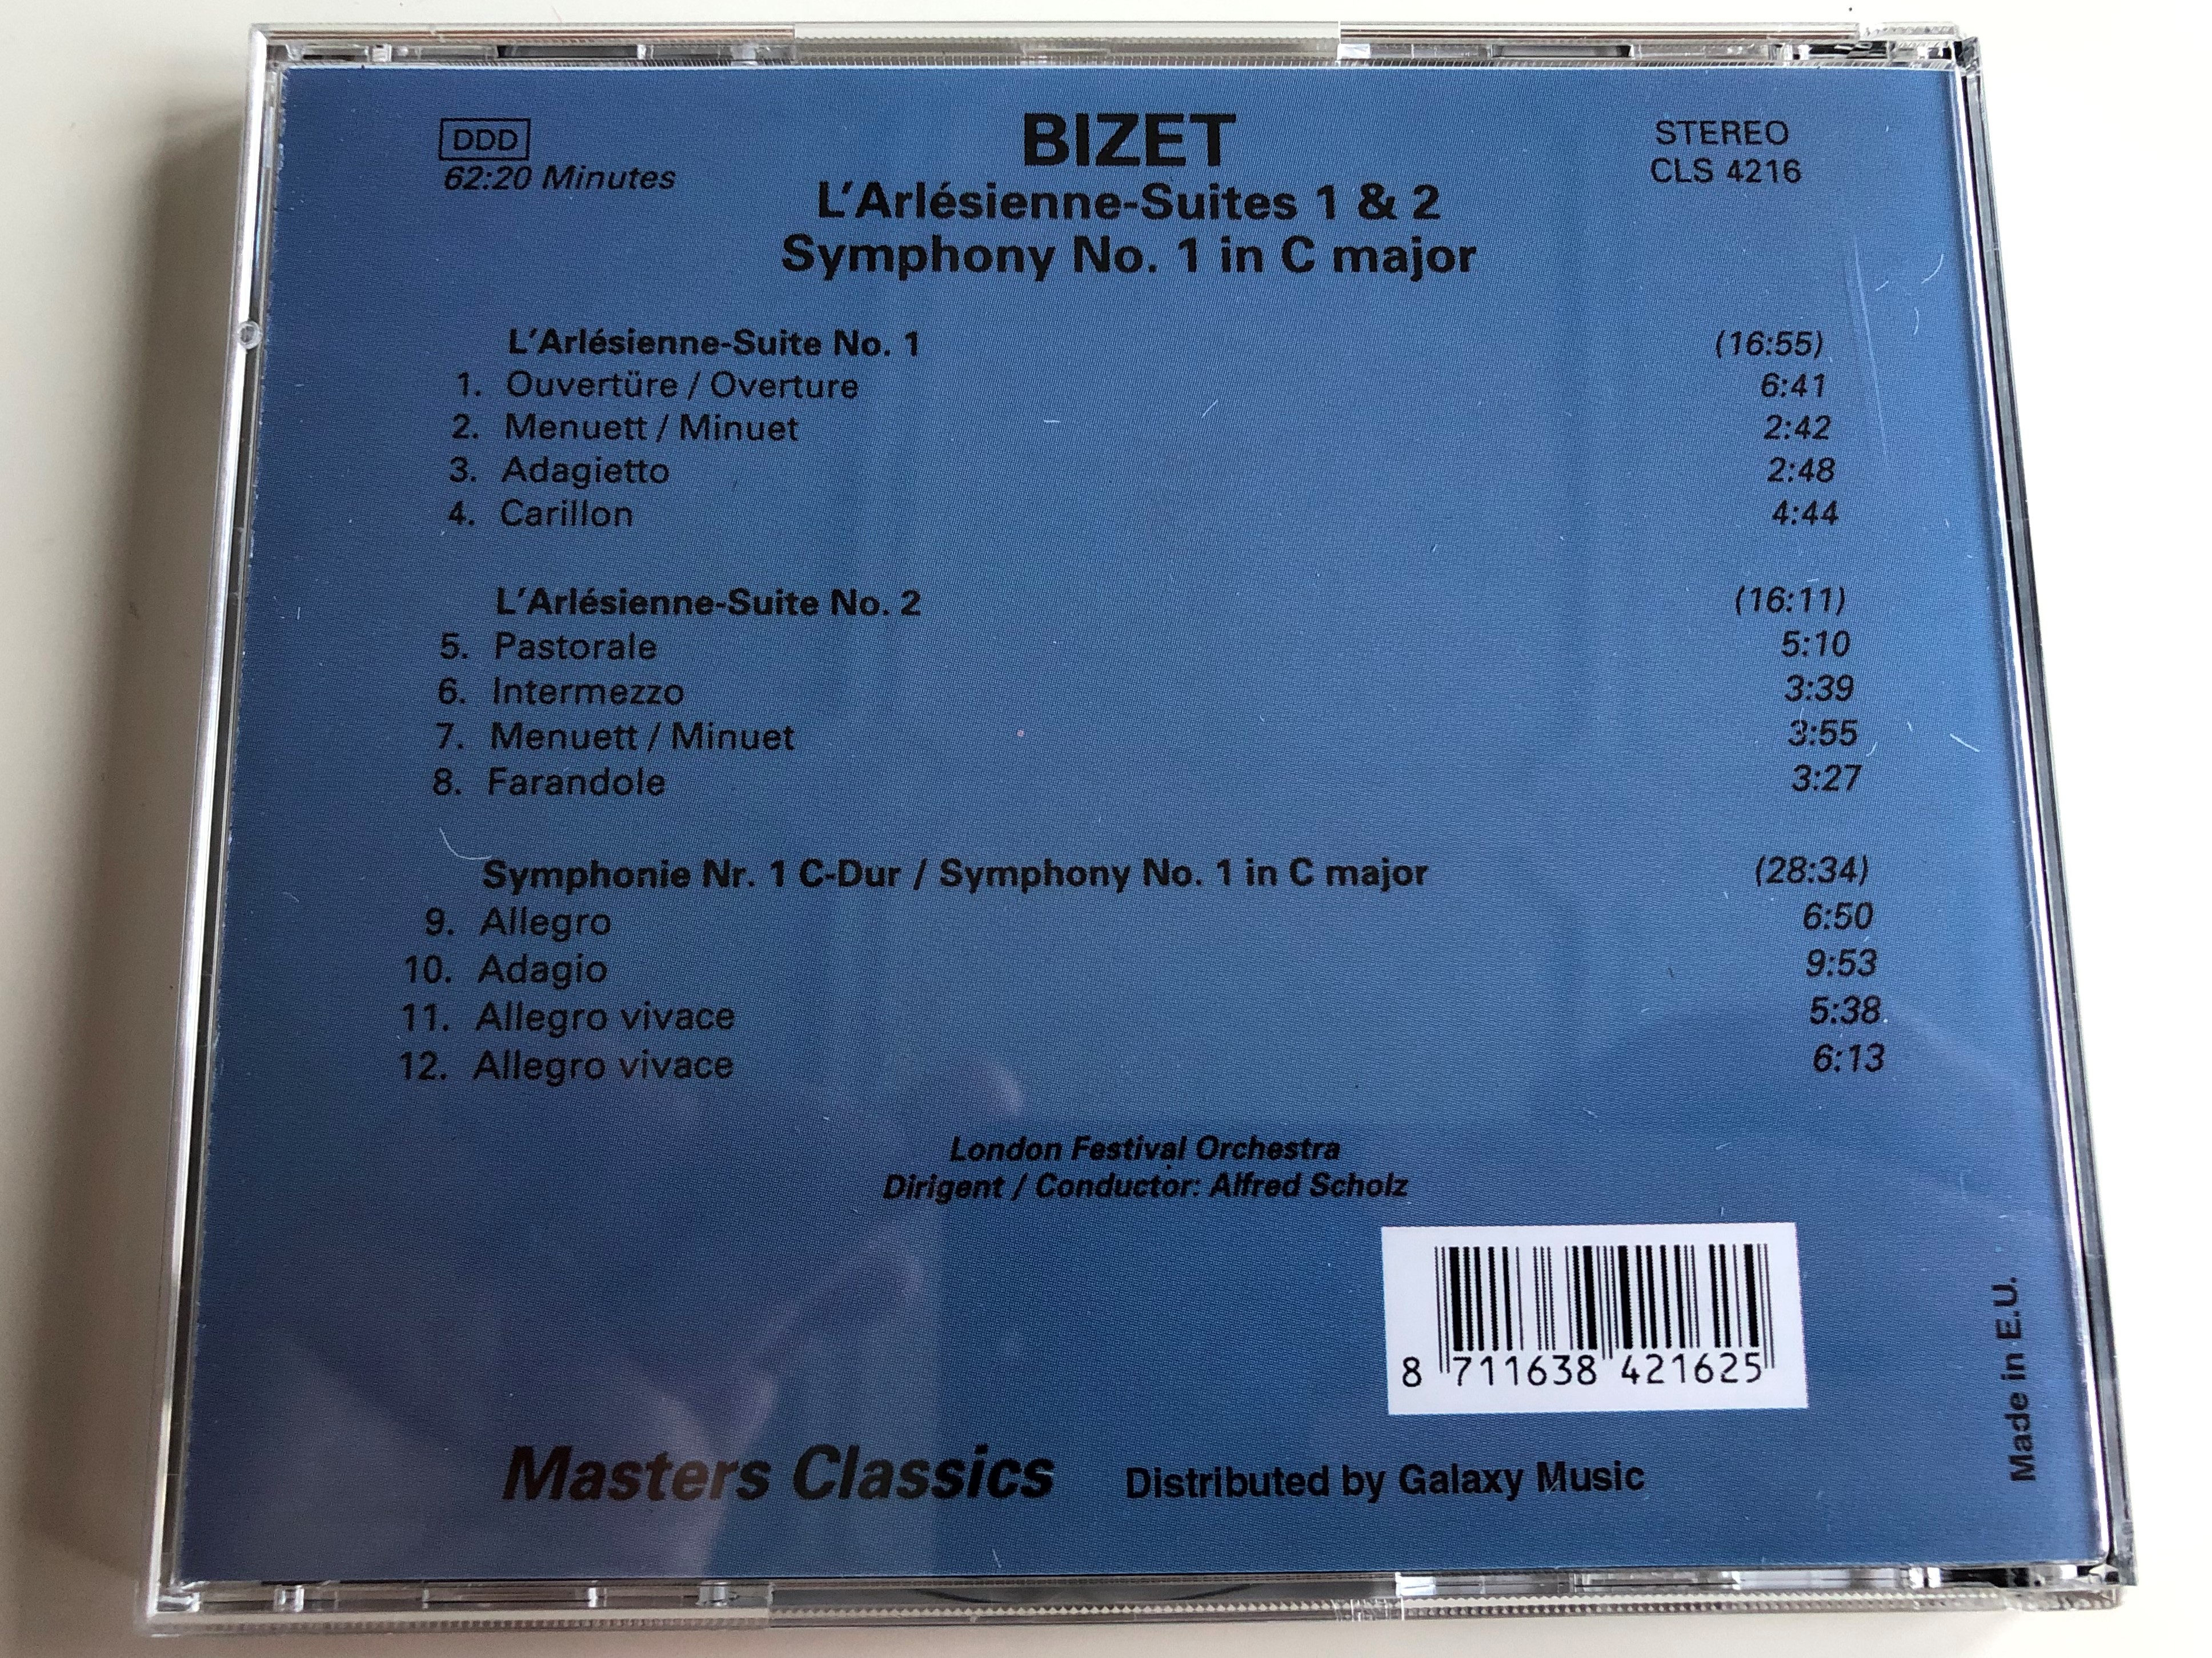 georges-bizet-audio-cd-l-arl-sienne-suites-1-2-symphony-no.-1-symphony-nr.-1-london-festival-orchestra-conducted-by-alfred-scholz-masters-classic-cls-4216-3-.jpg